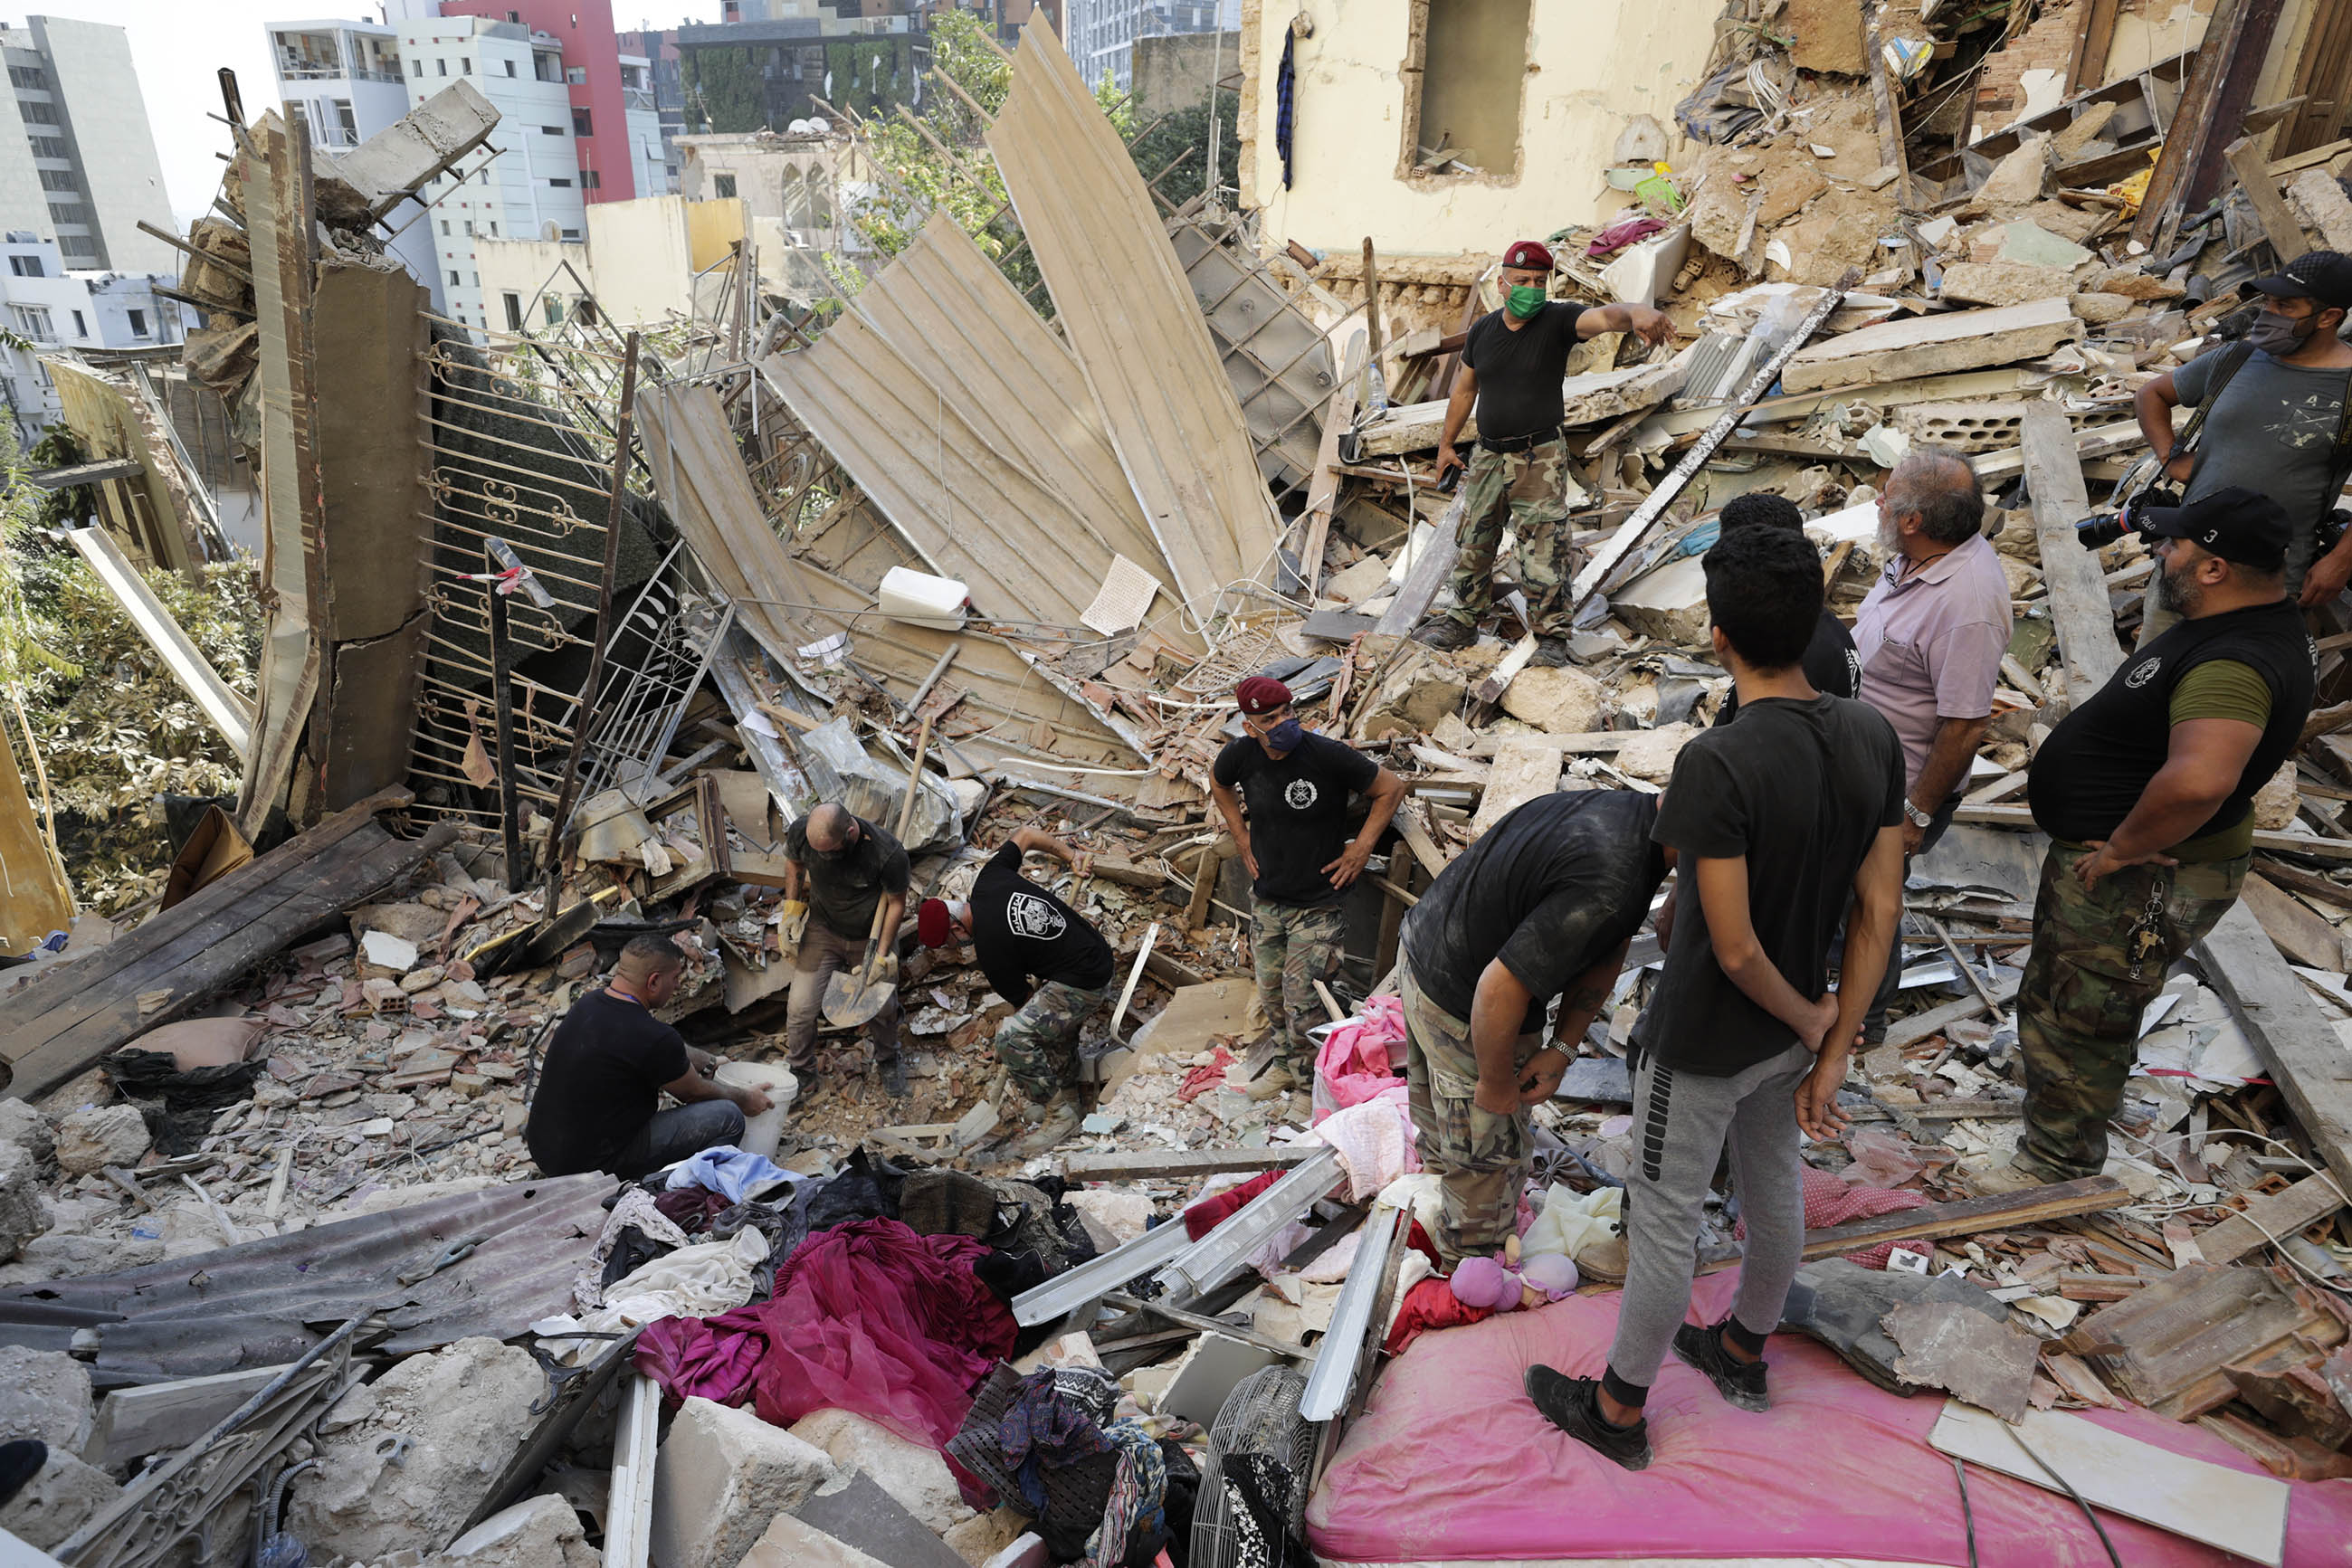 Lebanese soldiers search for survivors after a massive explosion in Beirut, Lebanon, on Wednesday, August 5. 